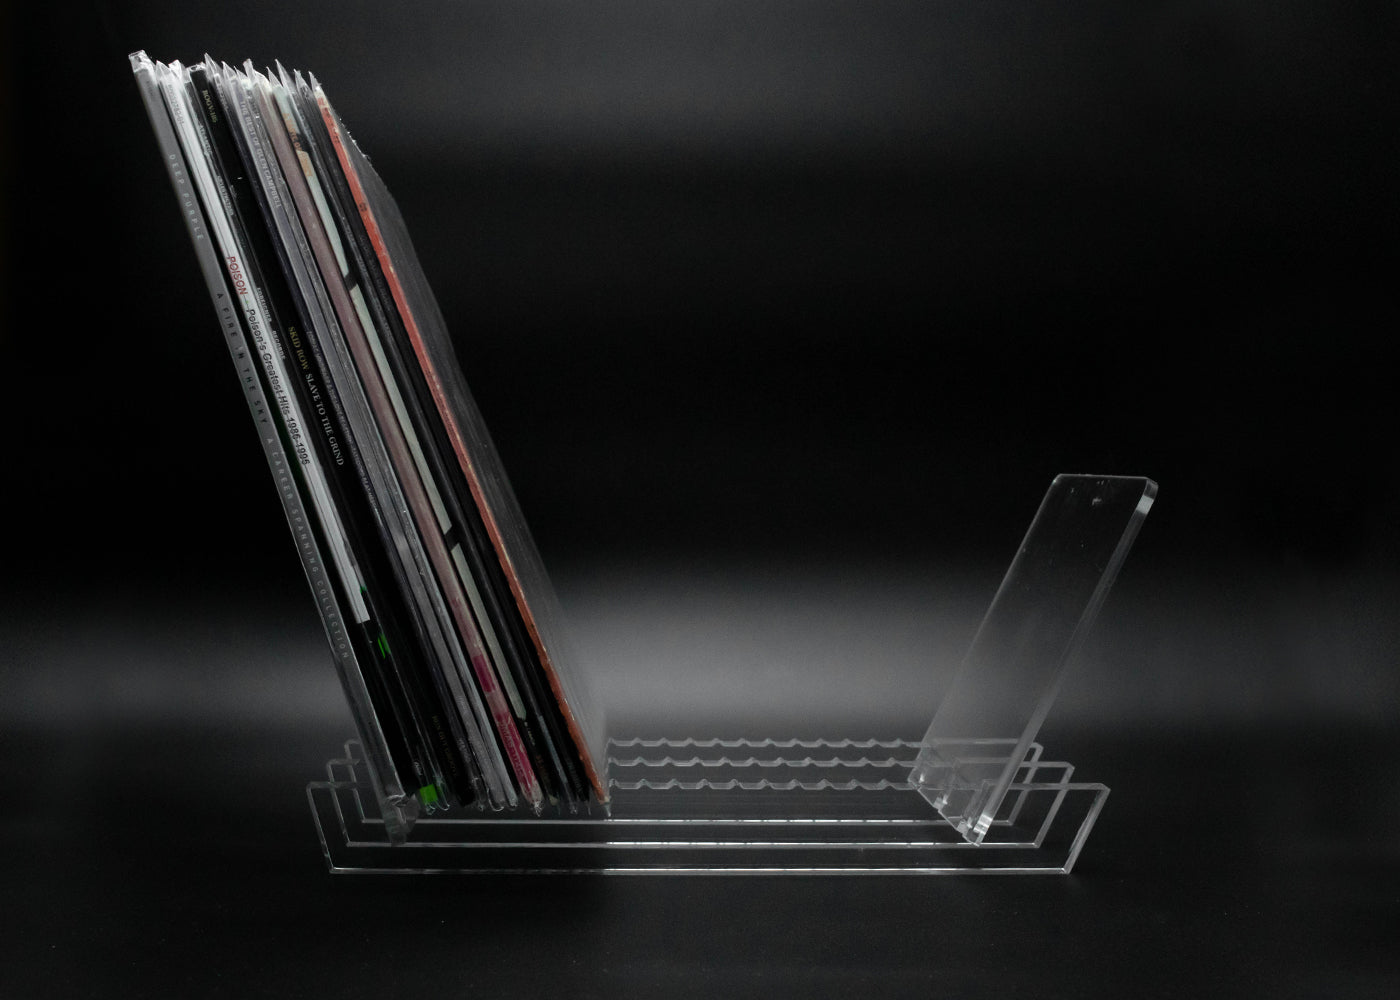 Acrylic Record Stand - 30 LP Holder